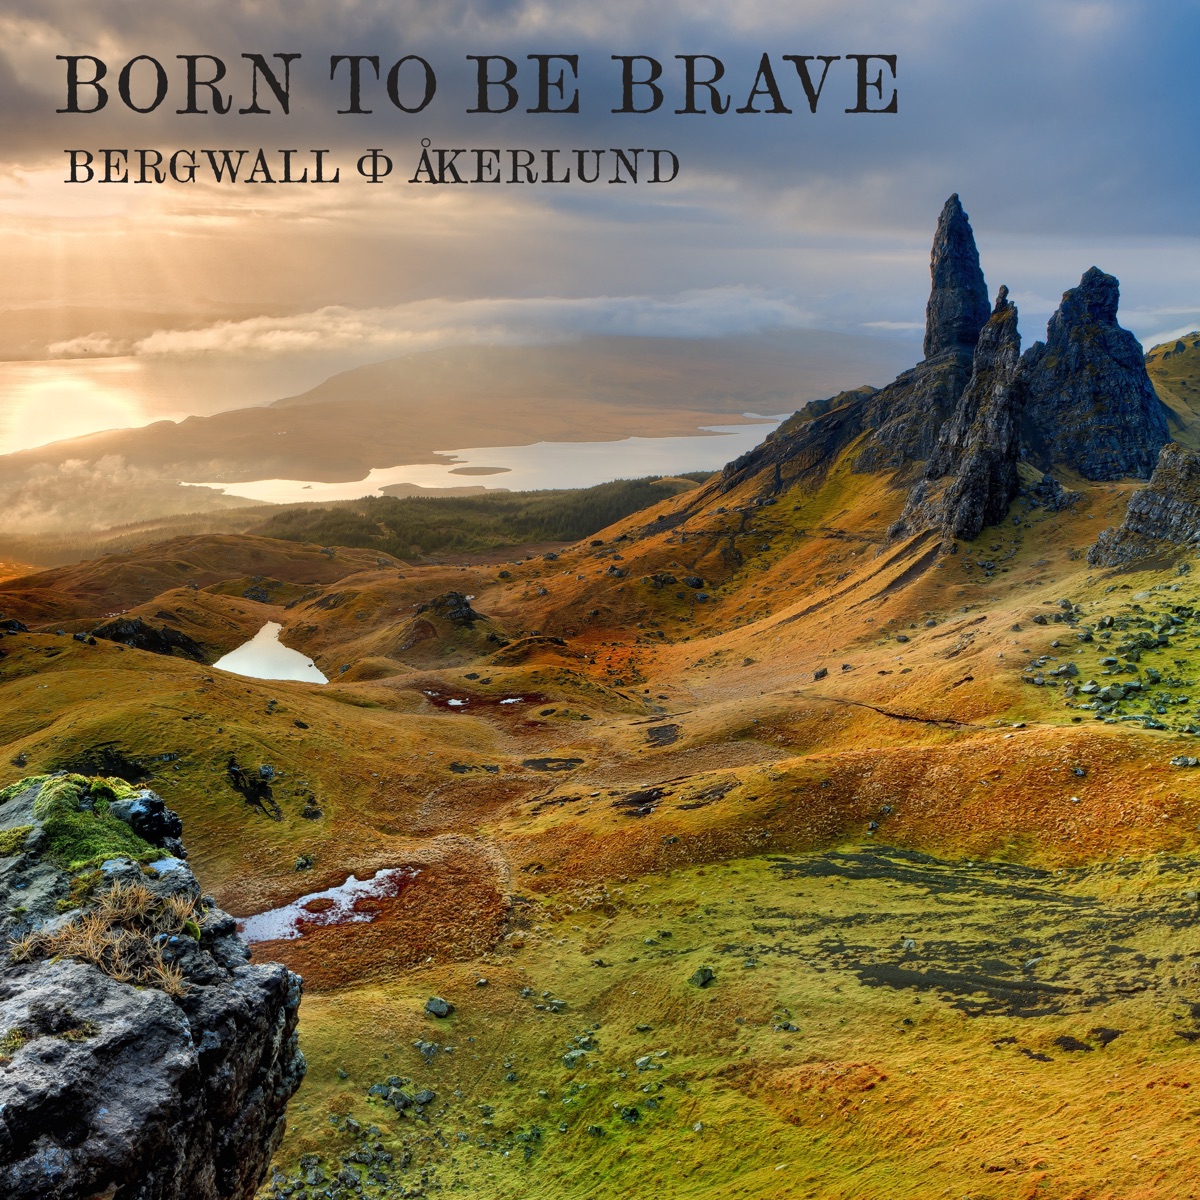 Born to Be Brave - Single by Bergwall & Åkerlund on Apple Music